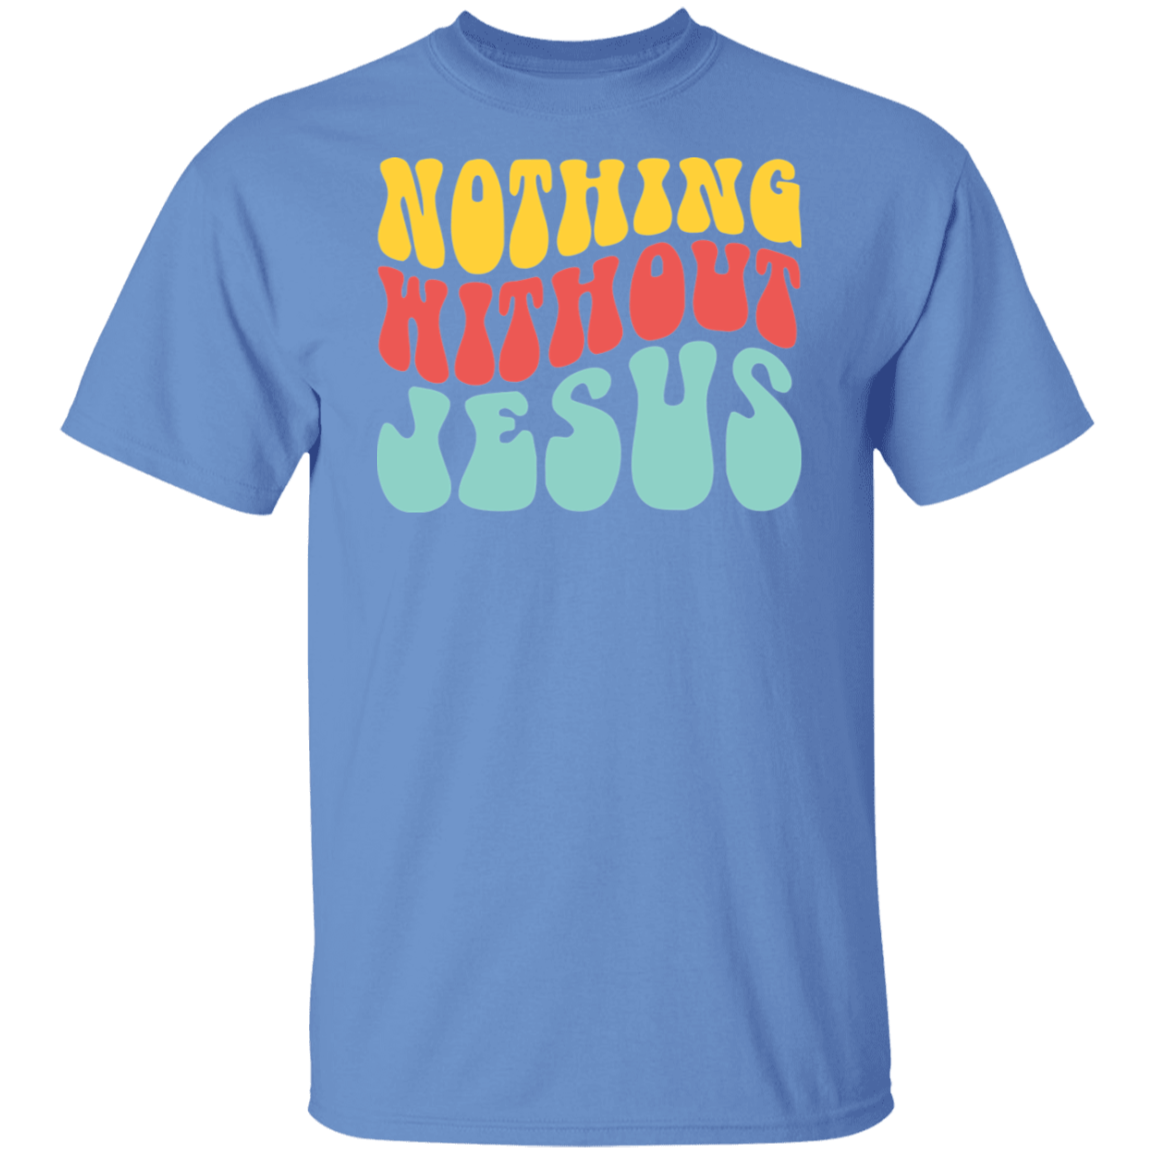 Nothing Without Jesus